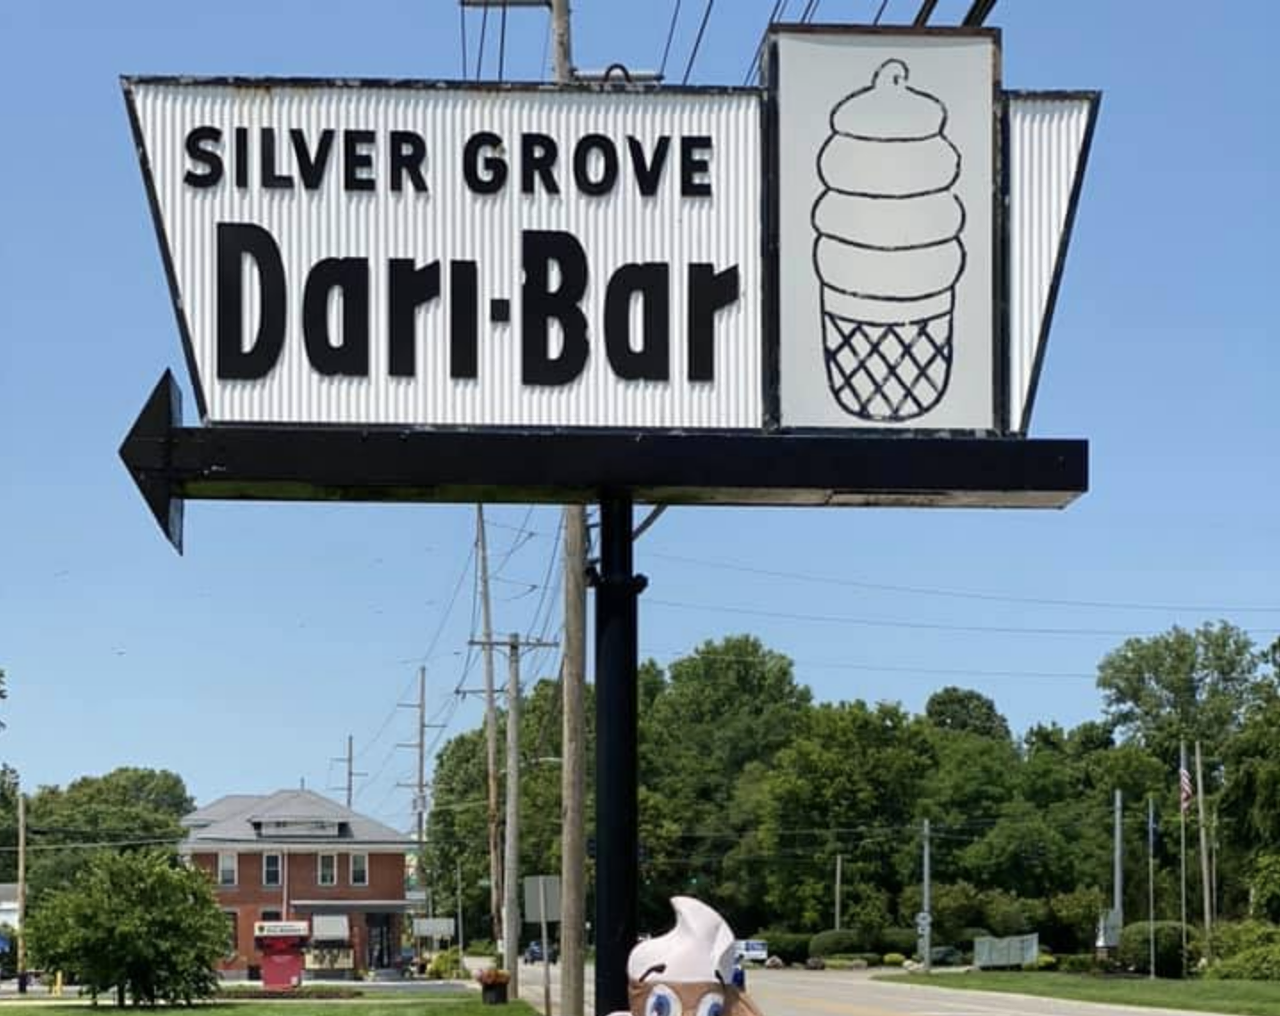 Silver Grove Dari Bar
5178 Mary Ingles Highway, Silver Grove
This little walk-up classic creamy whip in Northern Kentucky has tons of amazing options. If you're a fan of Graeter's black raspberry chocolate chip, opt for one of the Dari Bar's hot fudge sundaes topped with black raspberry. Or a black raspberry blitz — their take on a Blizzard. In addition to soft serve, the Dari Bar offers burgers, sandwiches, coneys, actual footlong footlongs and cheese fries.